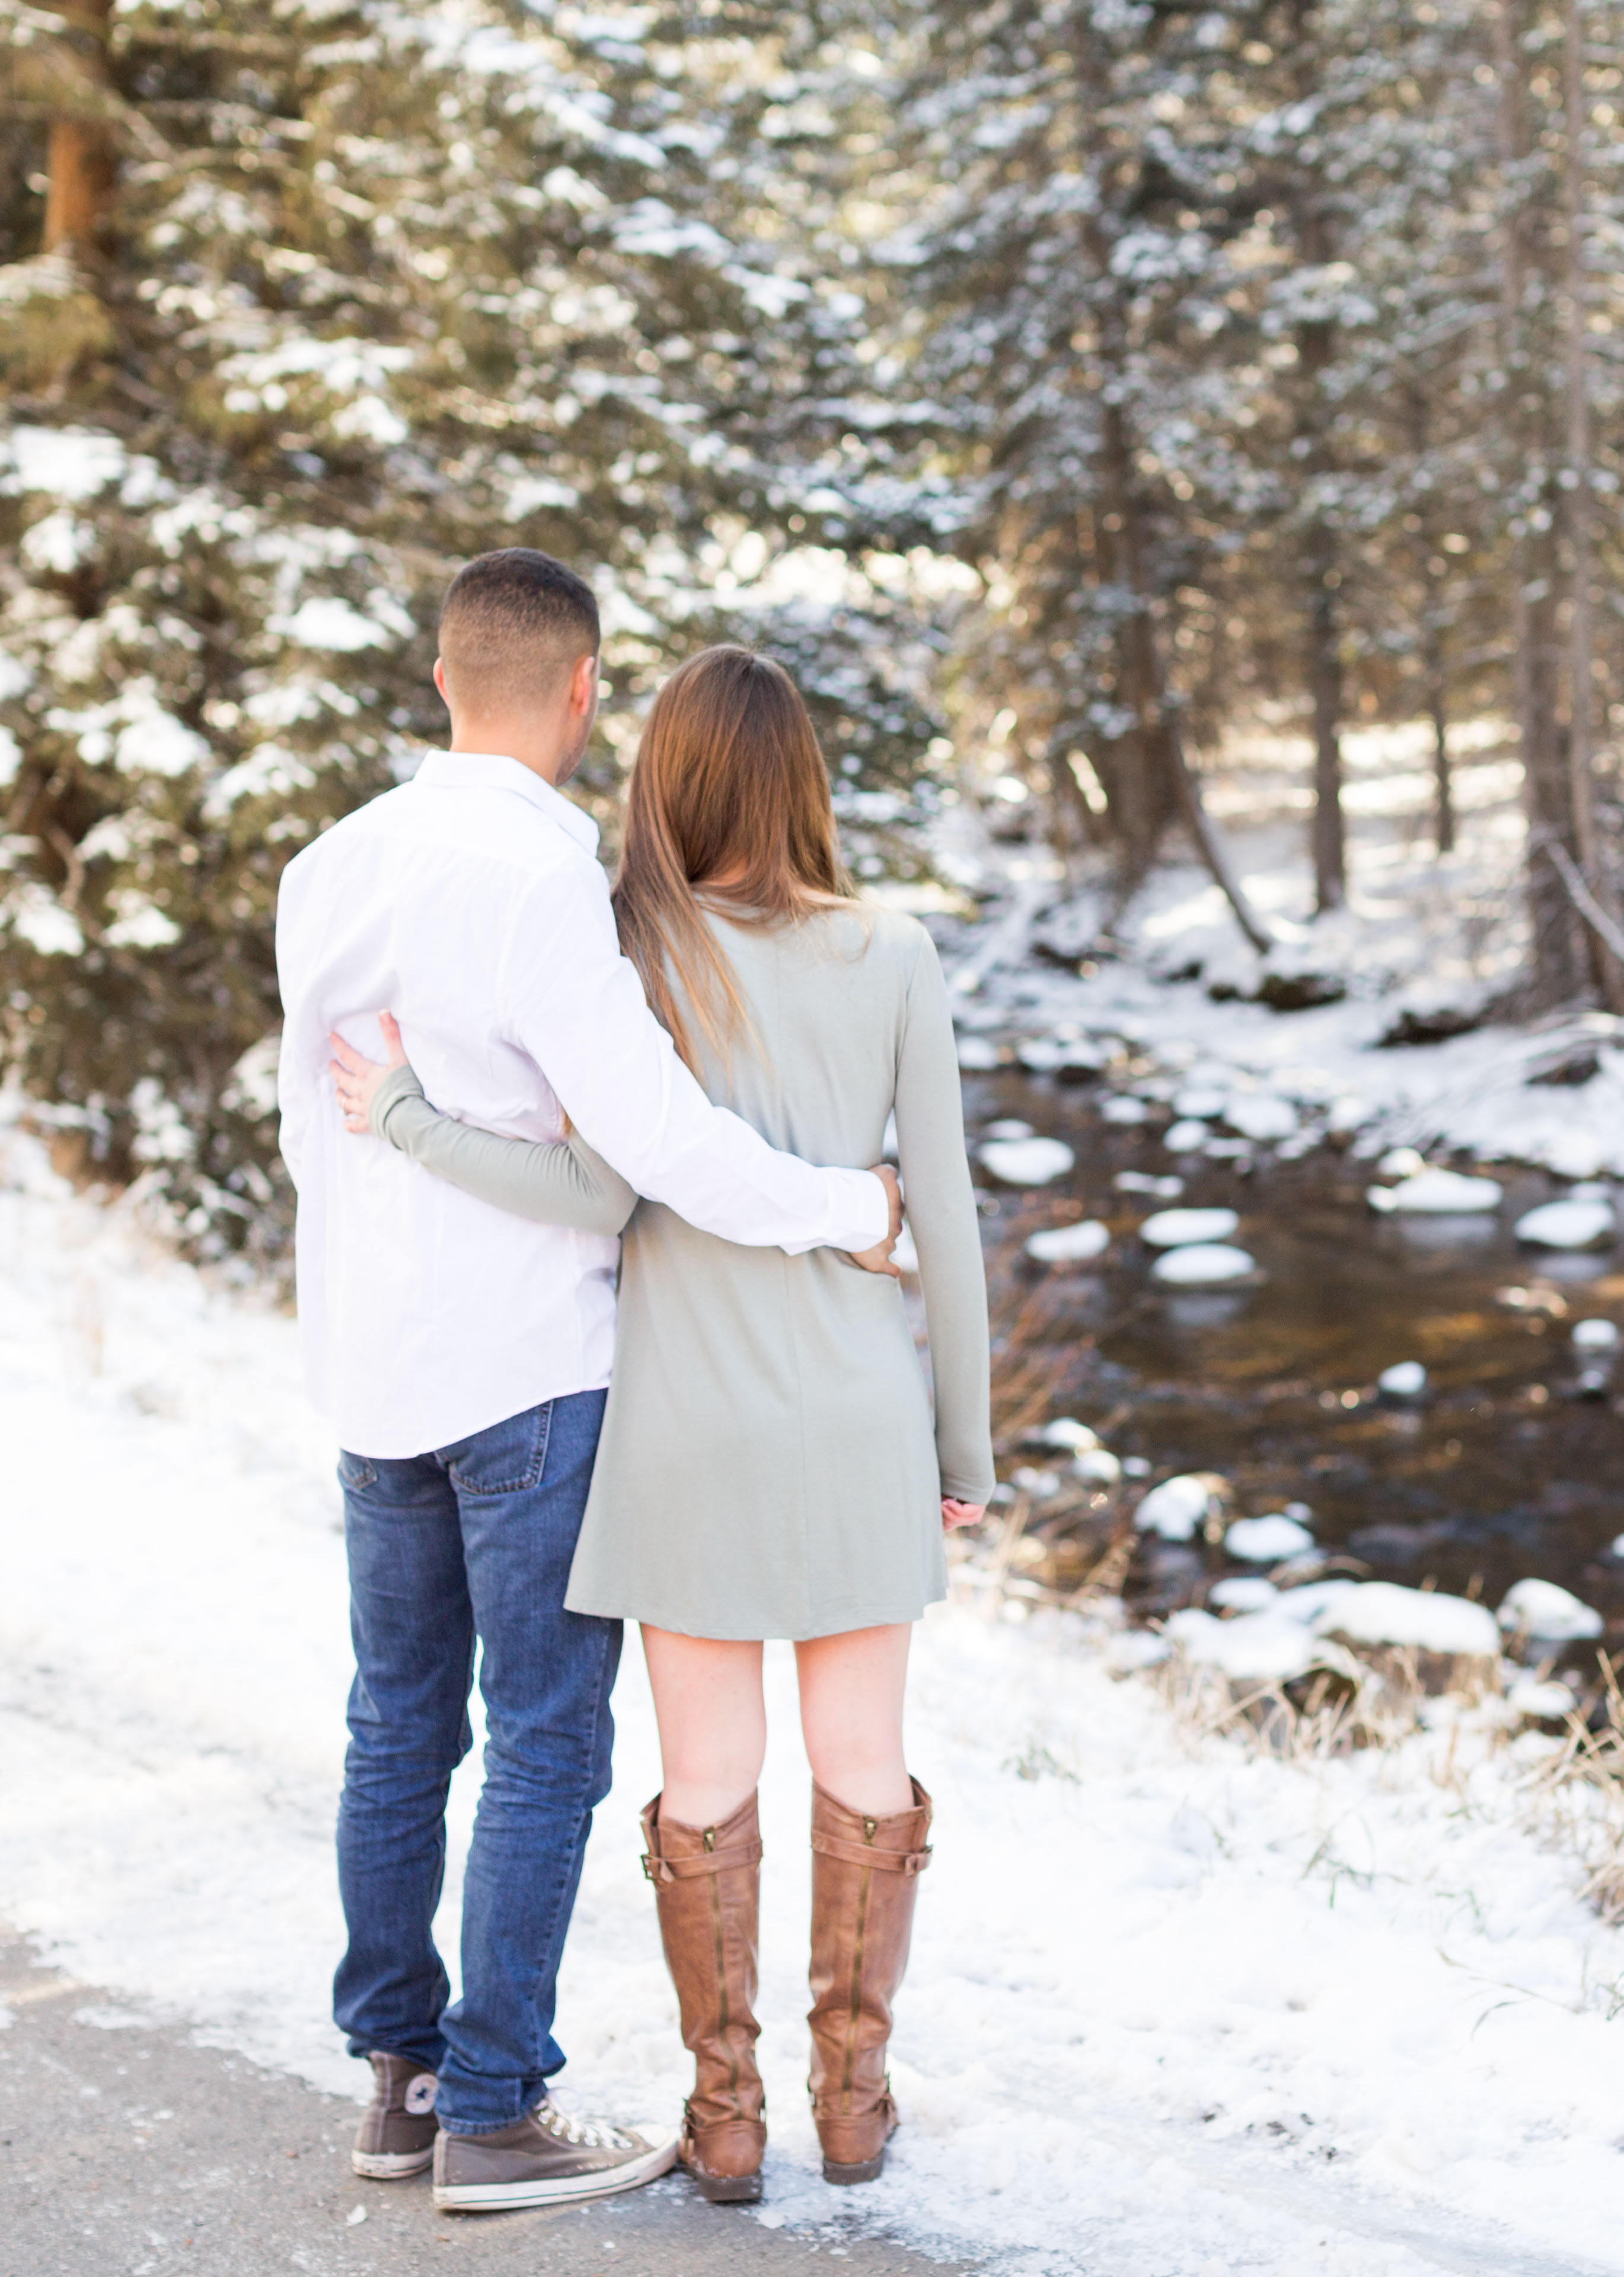 husband and wife hold each other and look at a river on a snowy day in the mountains